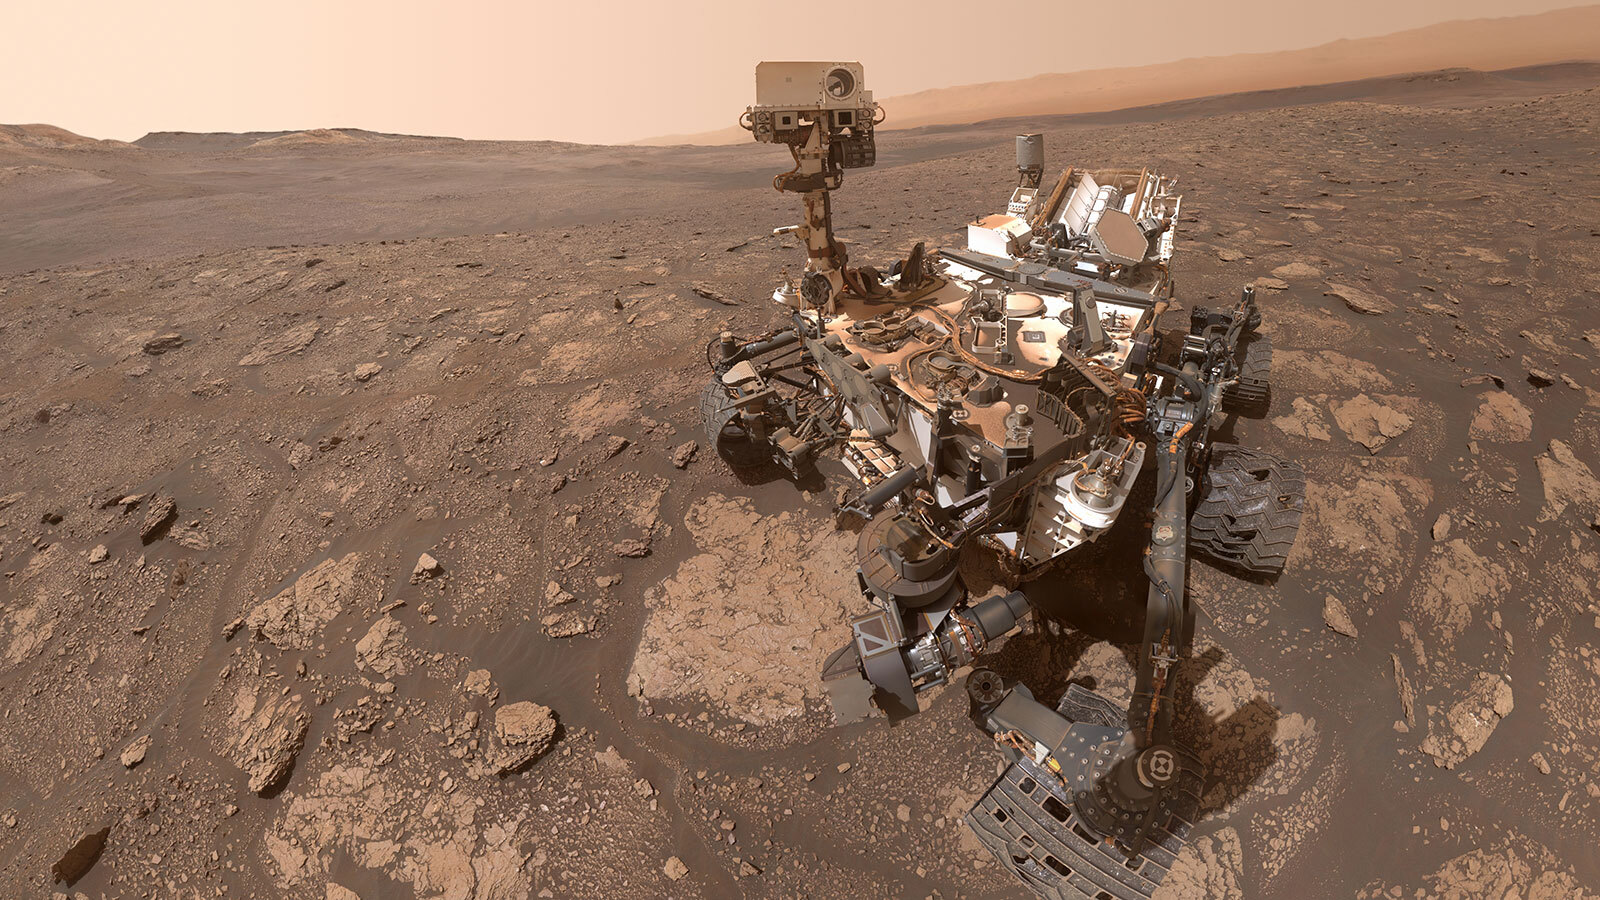 Curiosity's Selfie at the 'Mary Anning' location on Mars